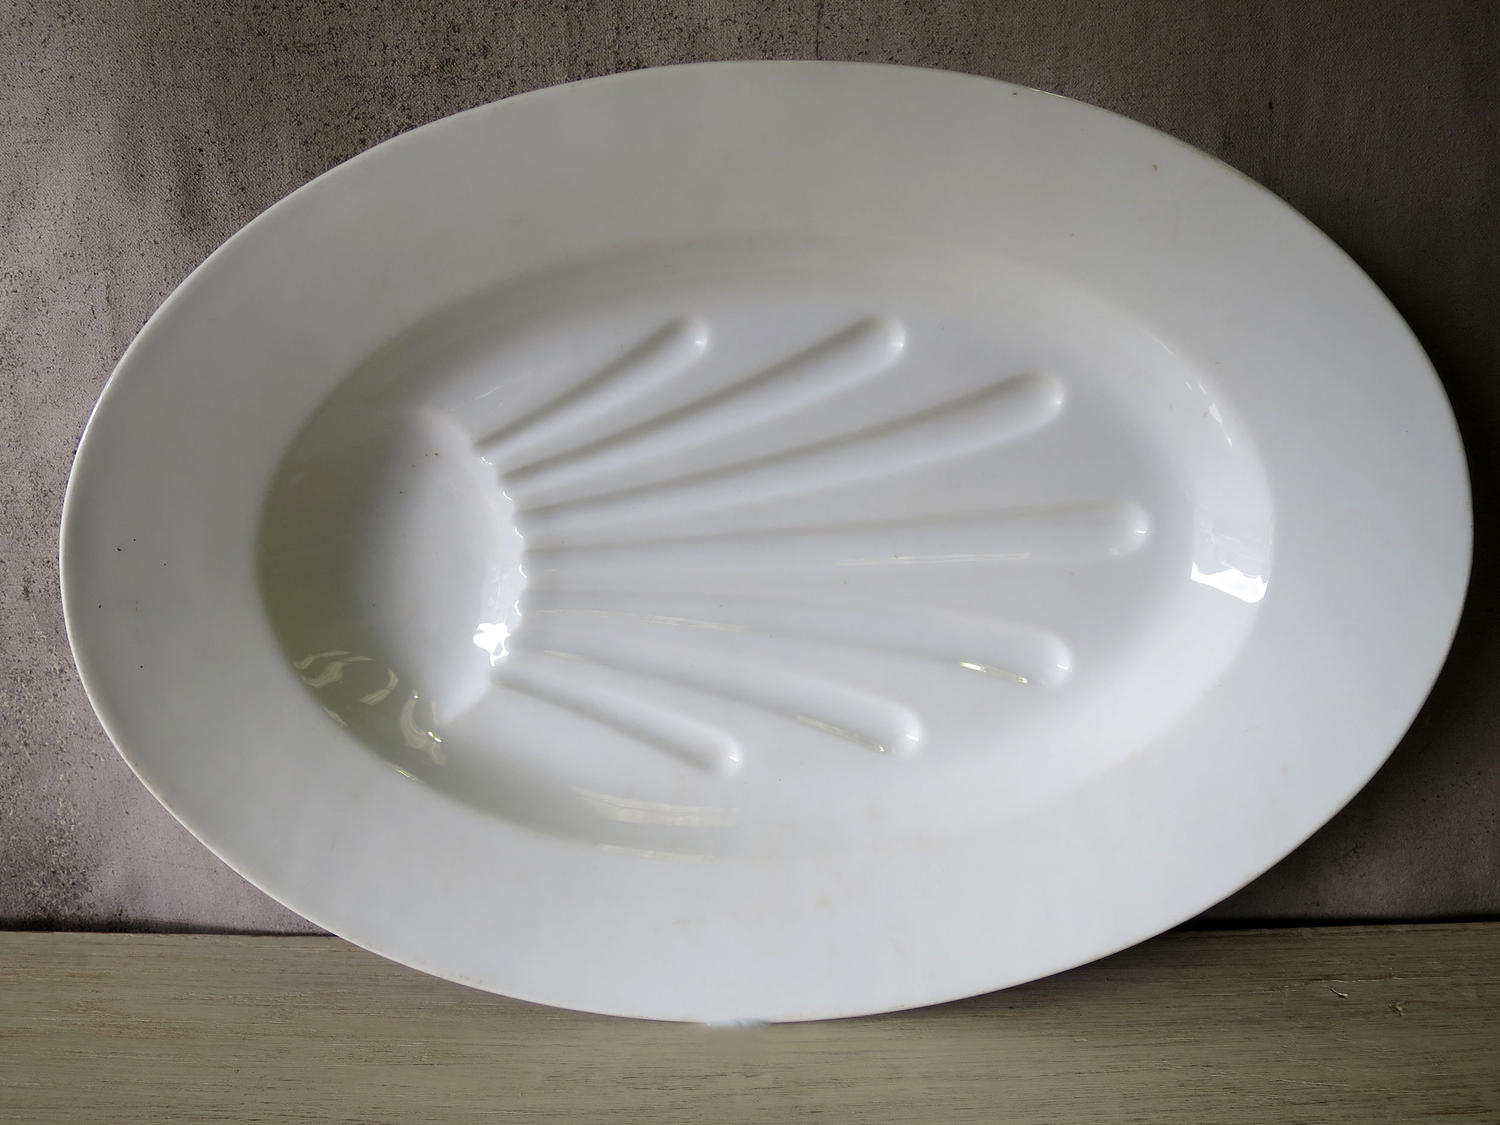 Heavy French White Porcelain Carving Platter - Circa 1900